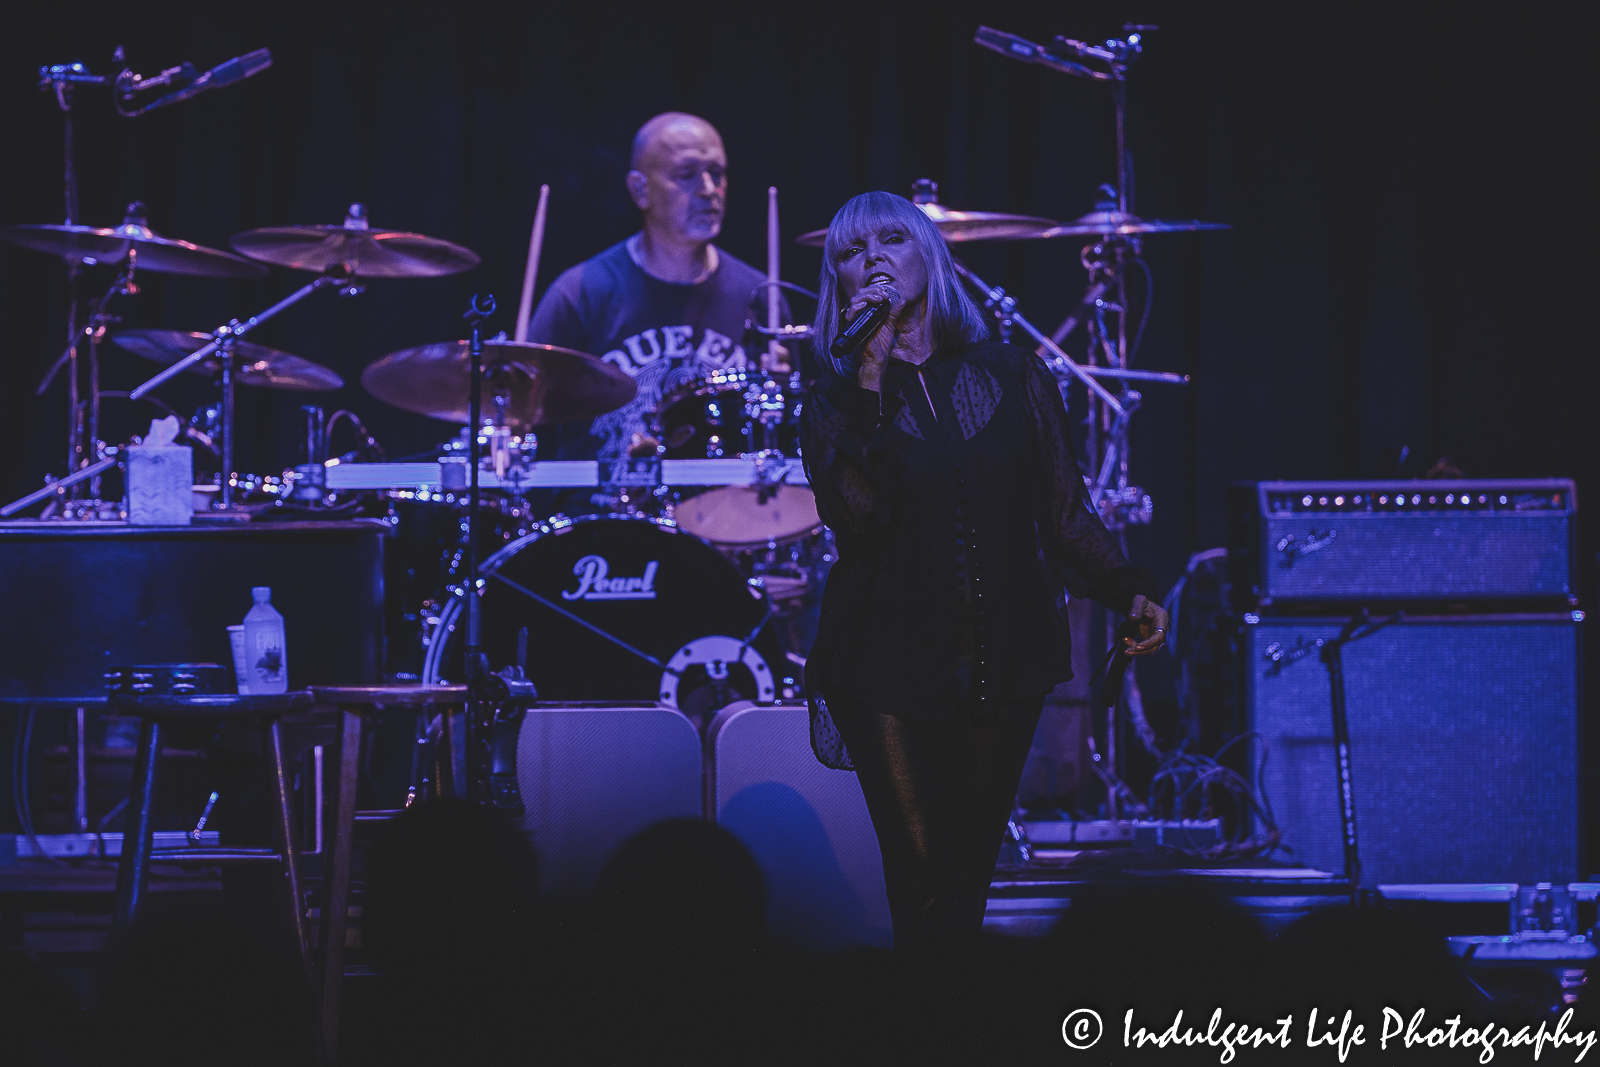 Pat Benatar with drummer Chris Ralles performing "I Need a Lover" from her debut album live at Uptown Theater in Kansas City, MO on August 2, 2022.